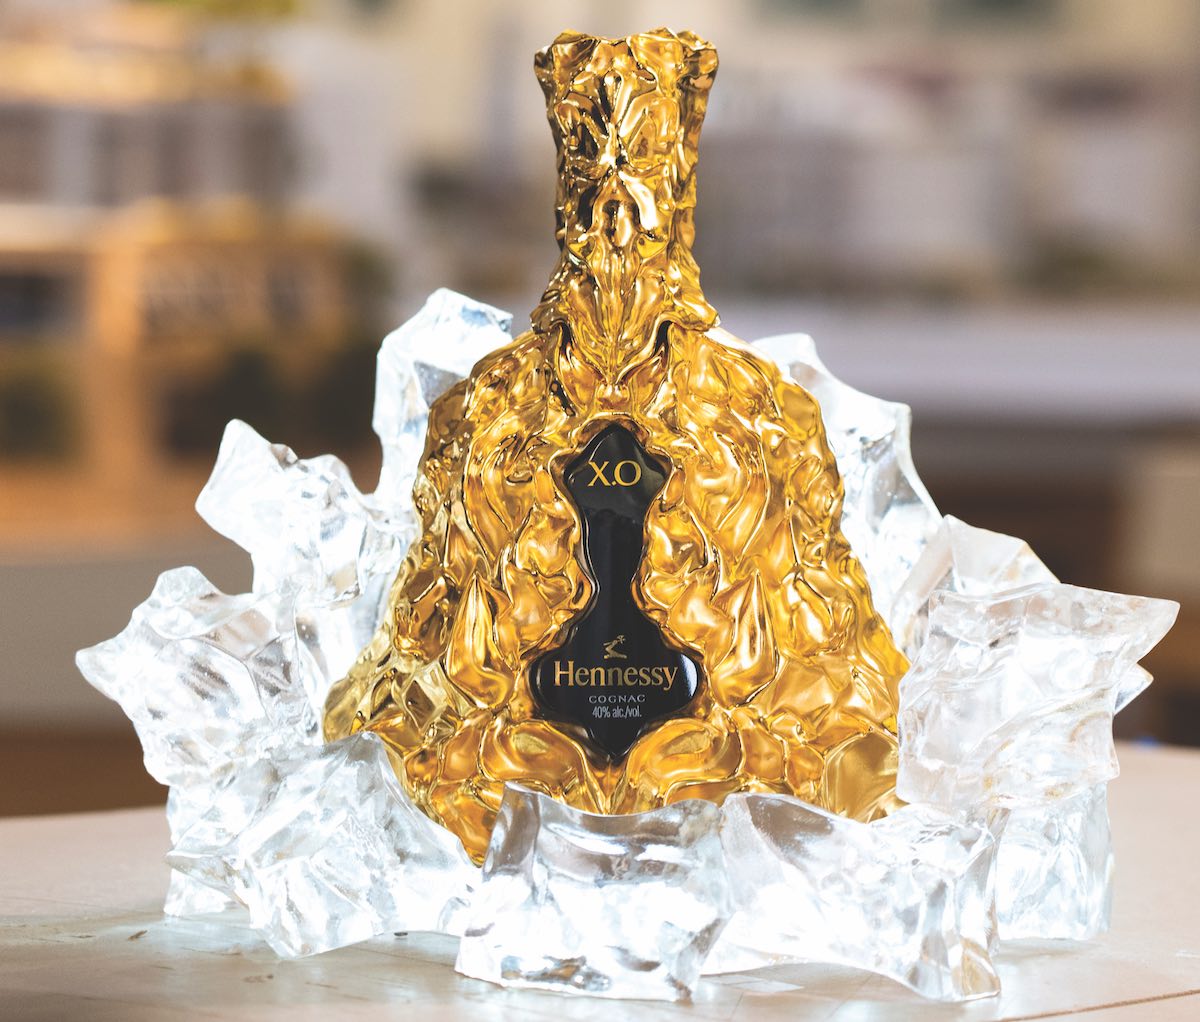 Hennessy X.O 2020 Frank Gehry Limited Edition Cognac